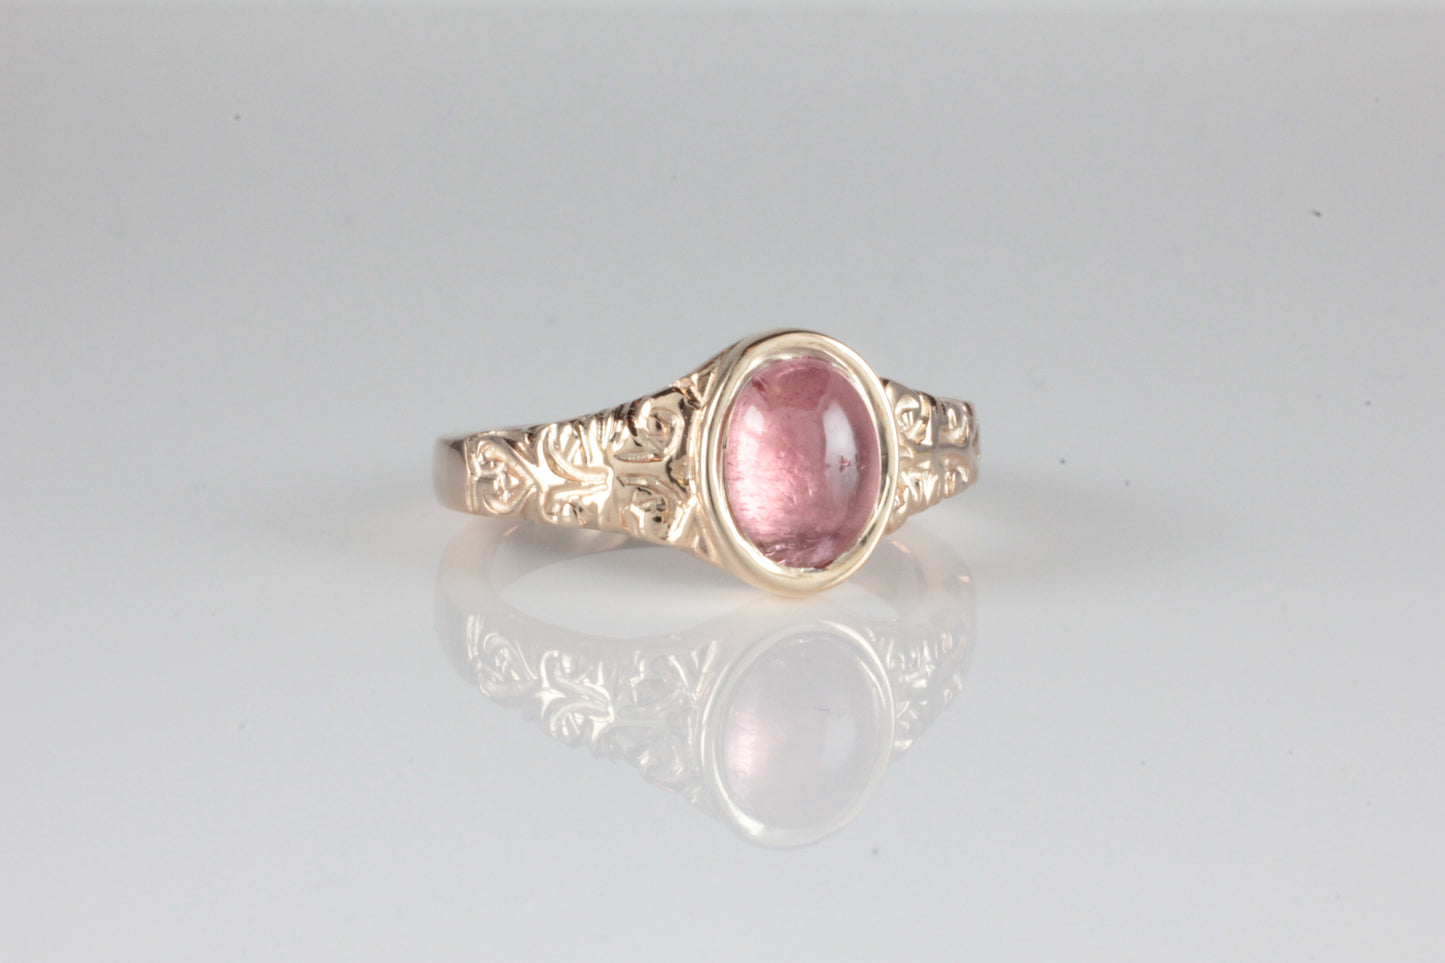 'Sostra' Victorian style Oval Pink Tourmaline Cabochon Ring